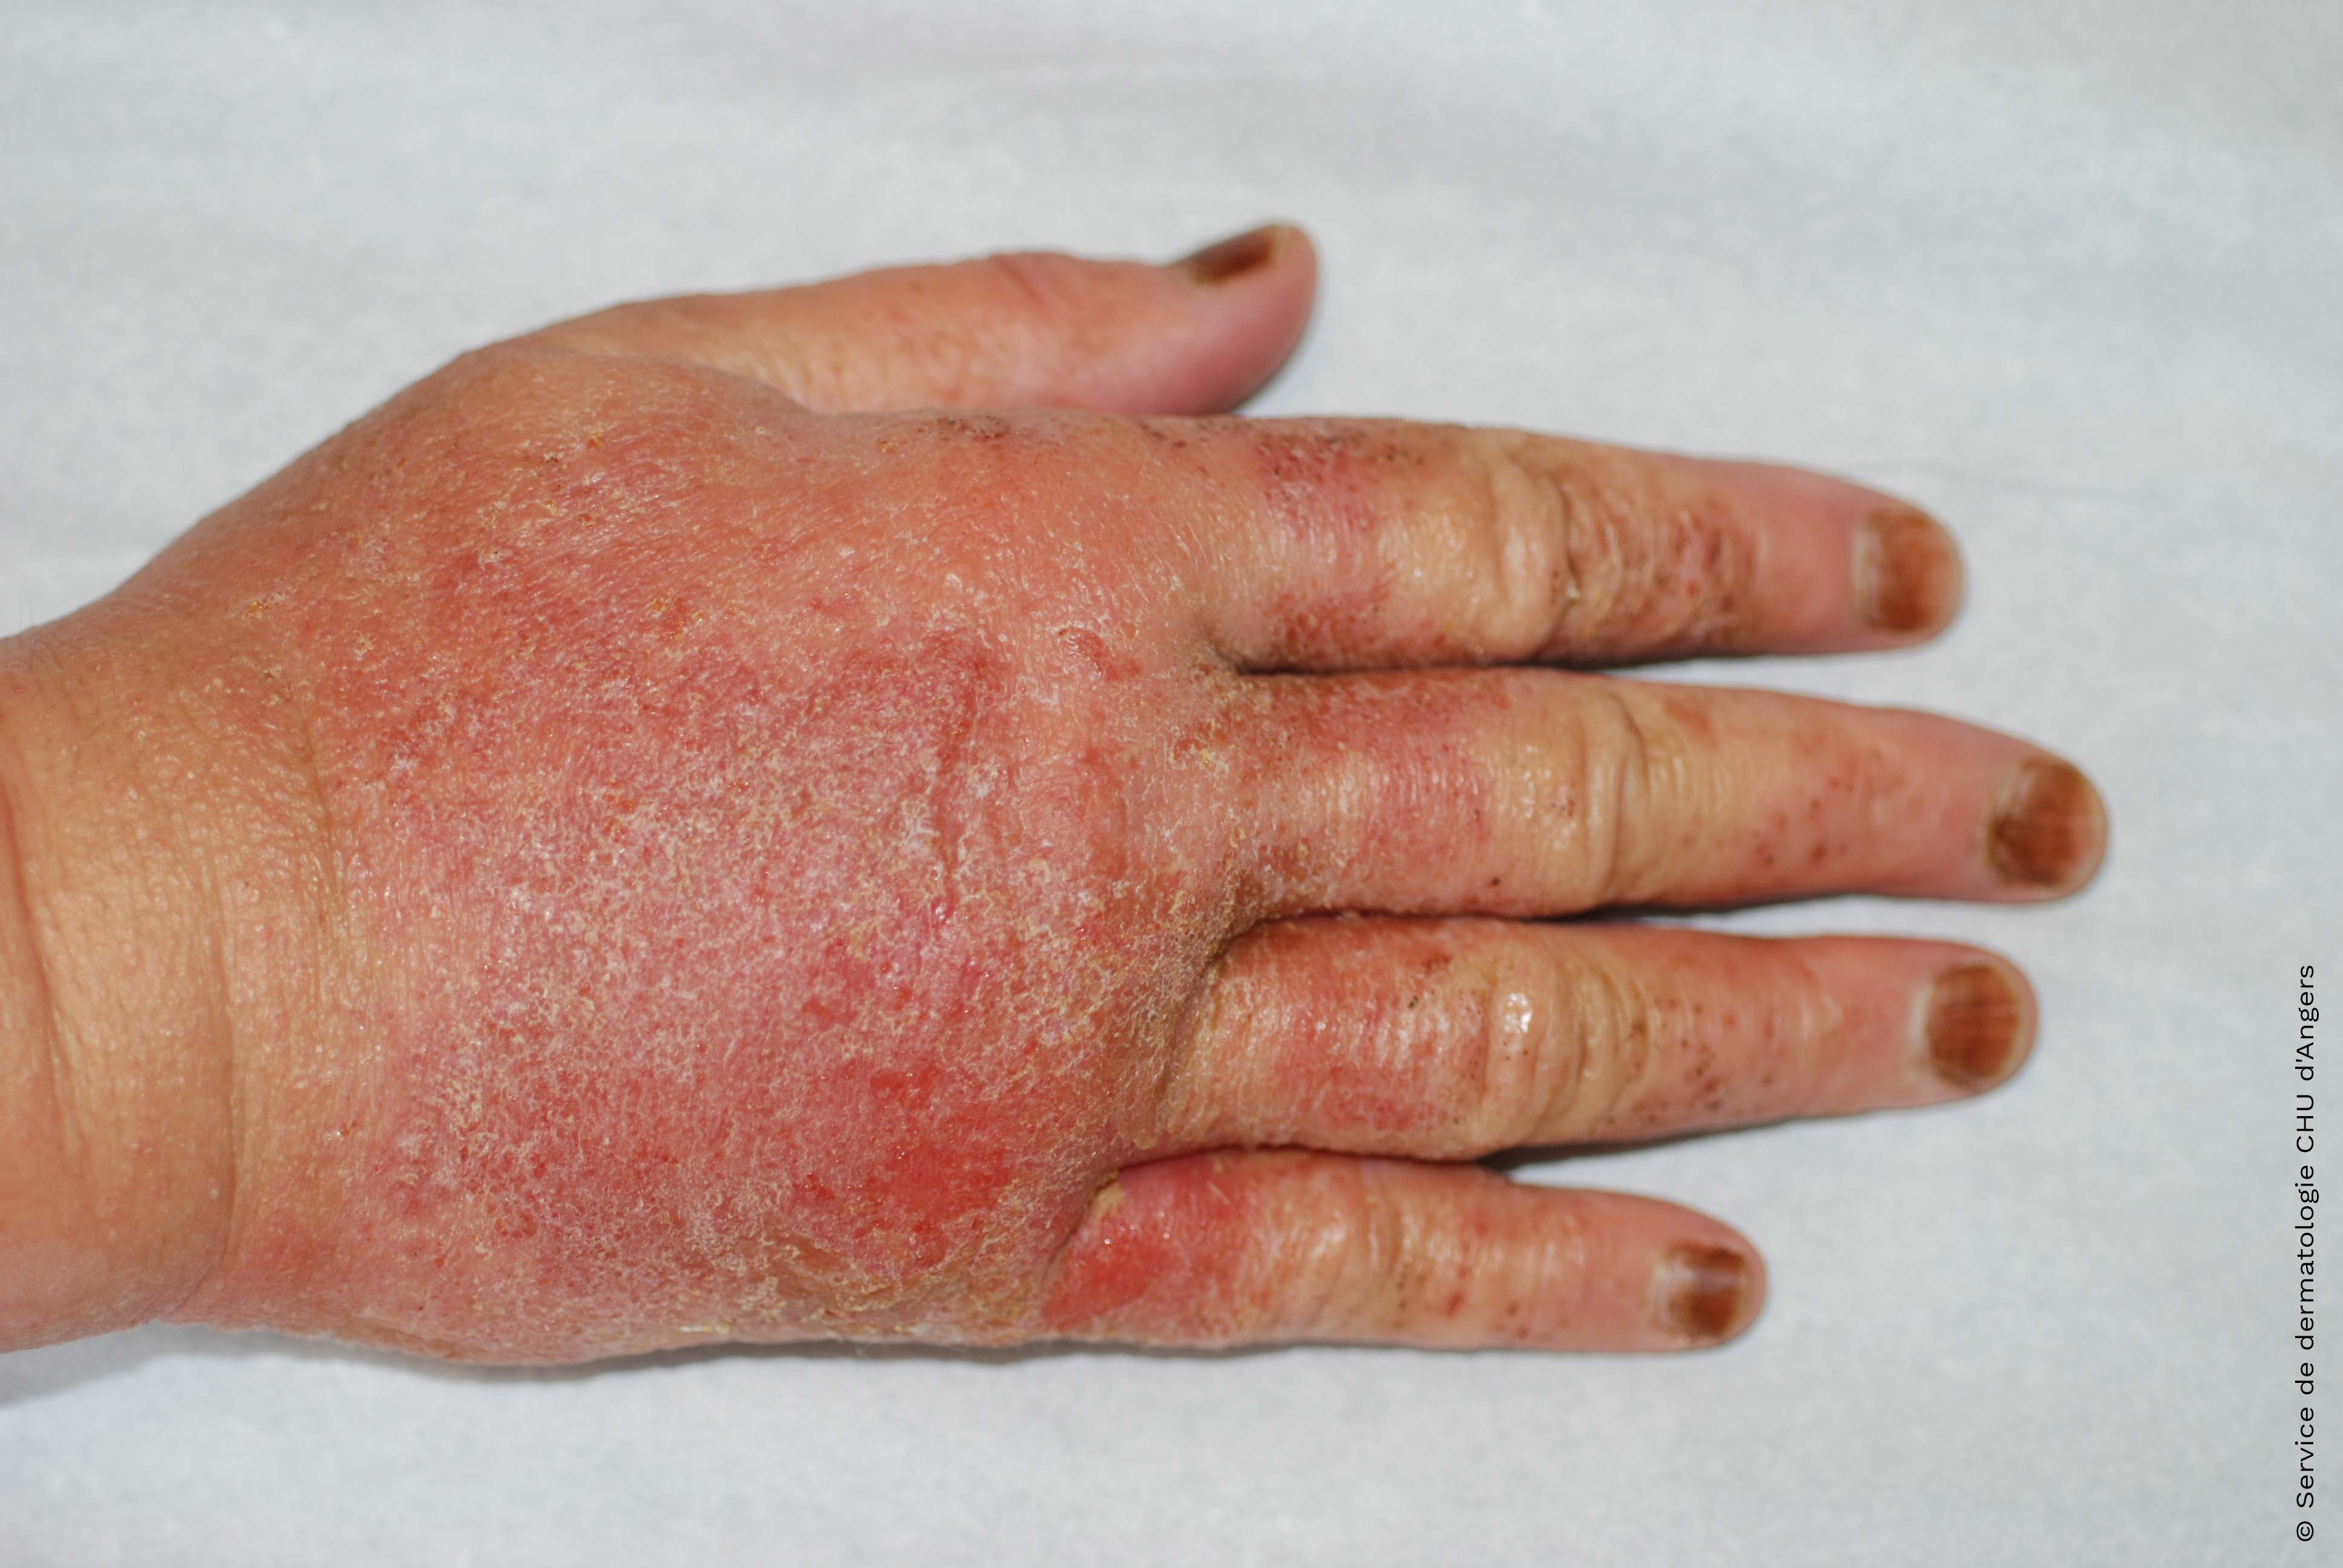 Acute allergic eczema of the hands with tea tree oil